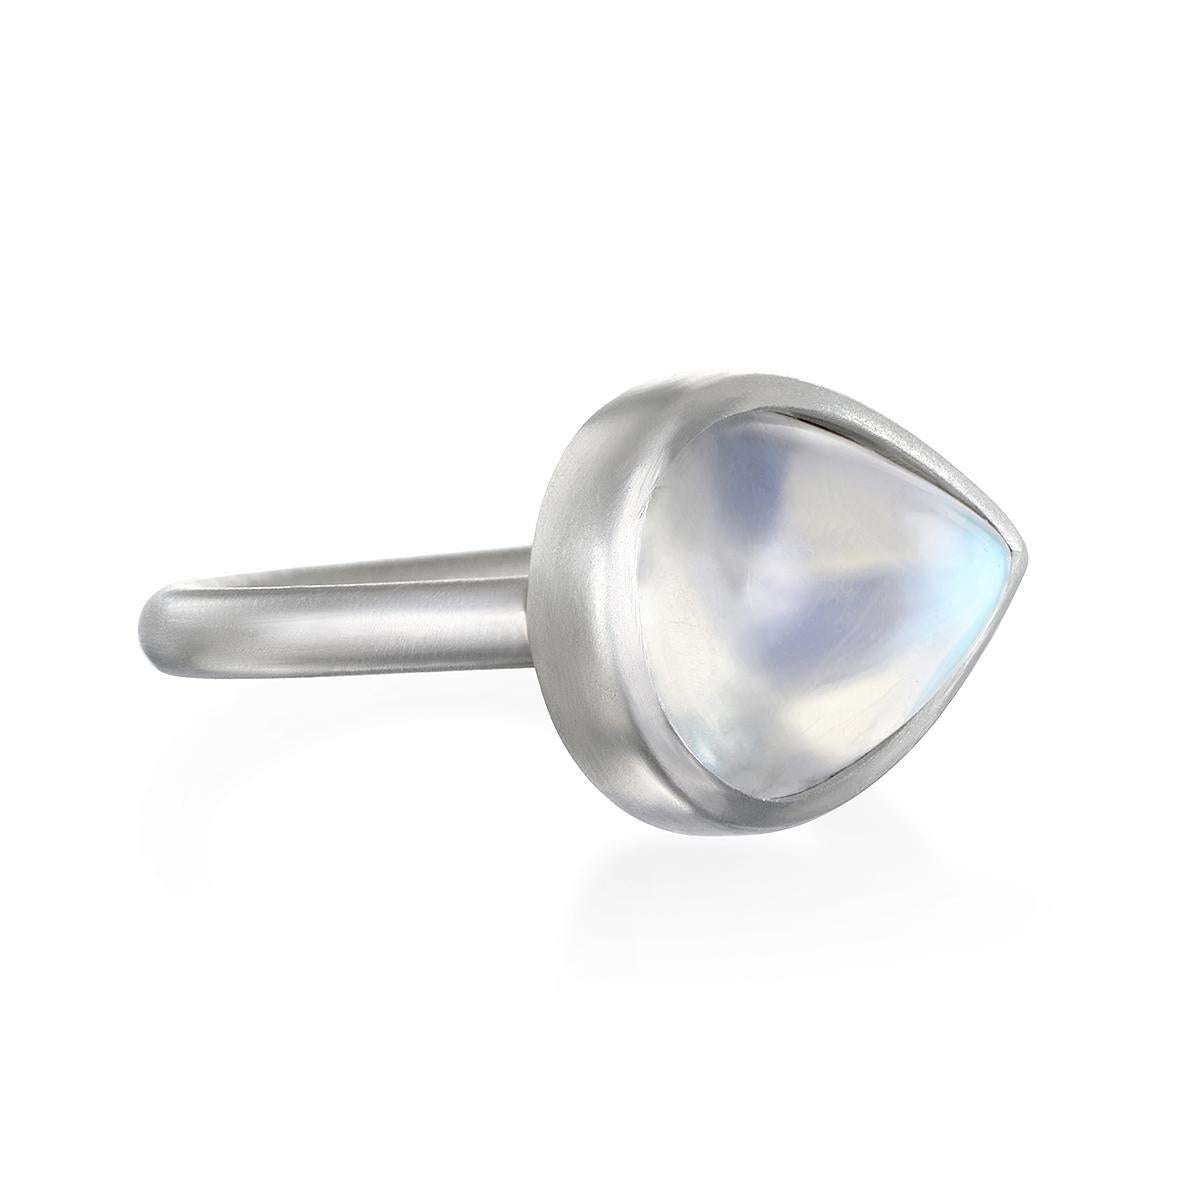 Considered to be a stone of inner growth and strength, this Ceylon Moonstone has been set by designer Faye Kim in platinum and reflects a bluish, milky light that has been compared to the light of the moon. The shape, polish, and matte platinum